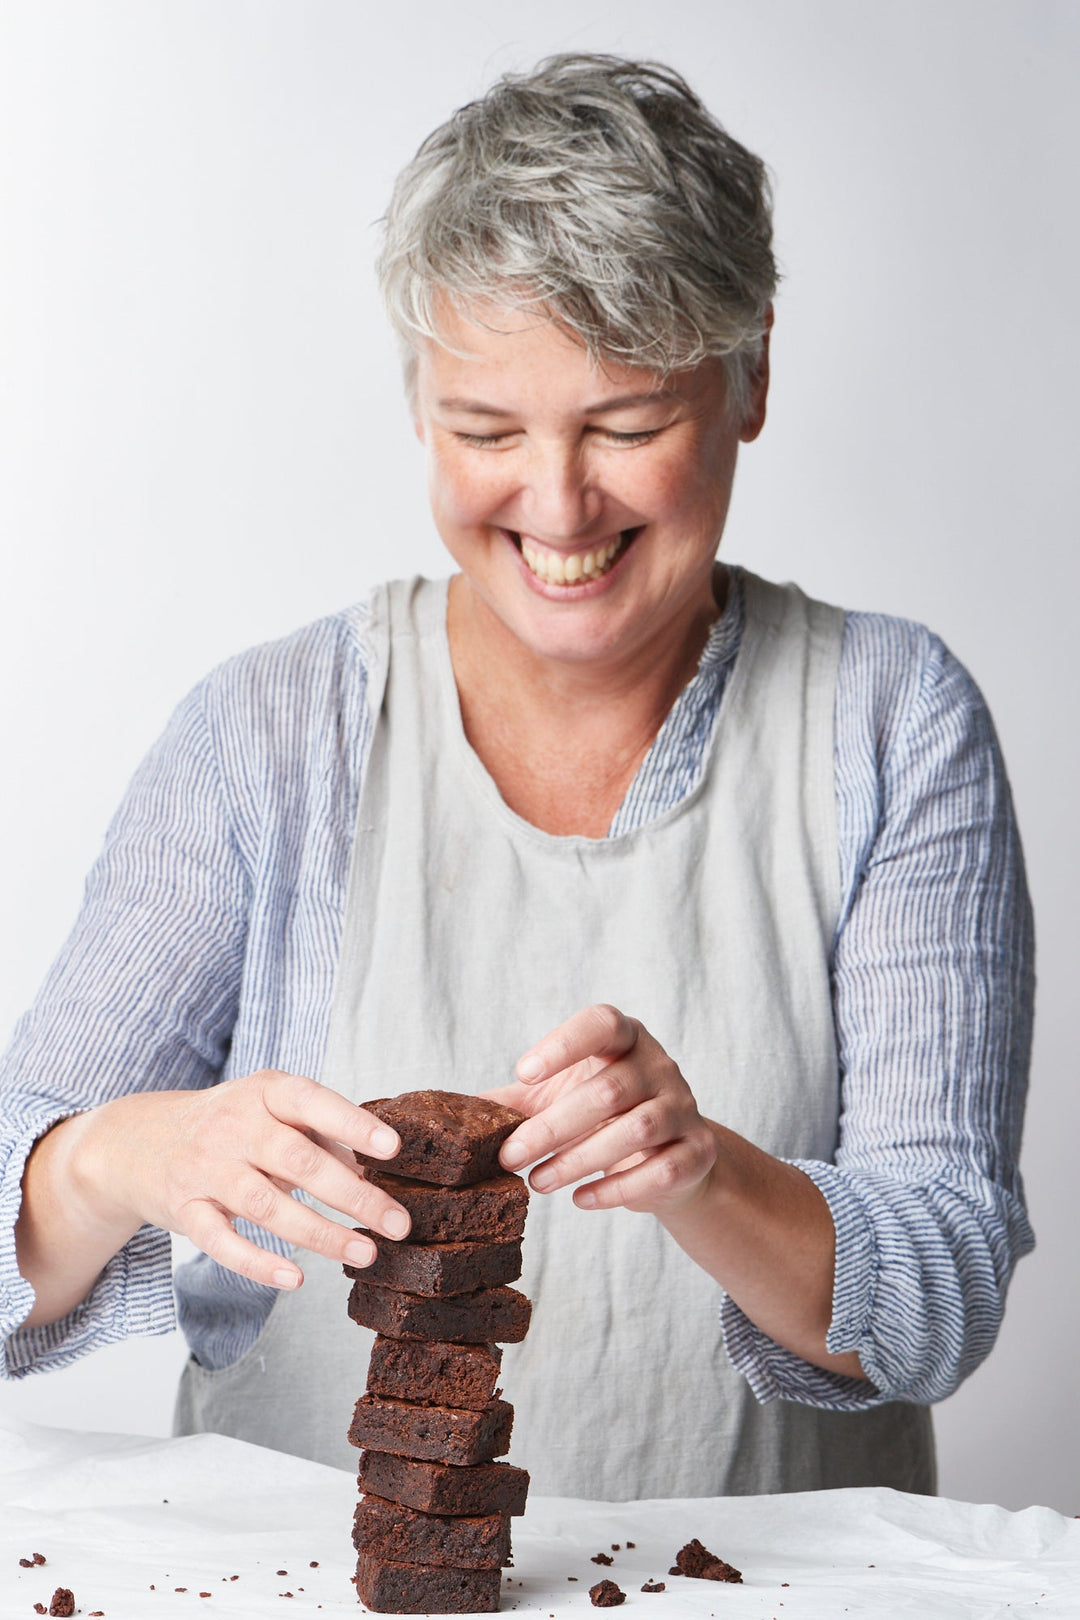 Woman stacking brownies with a joyful expression.